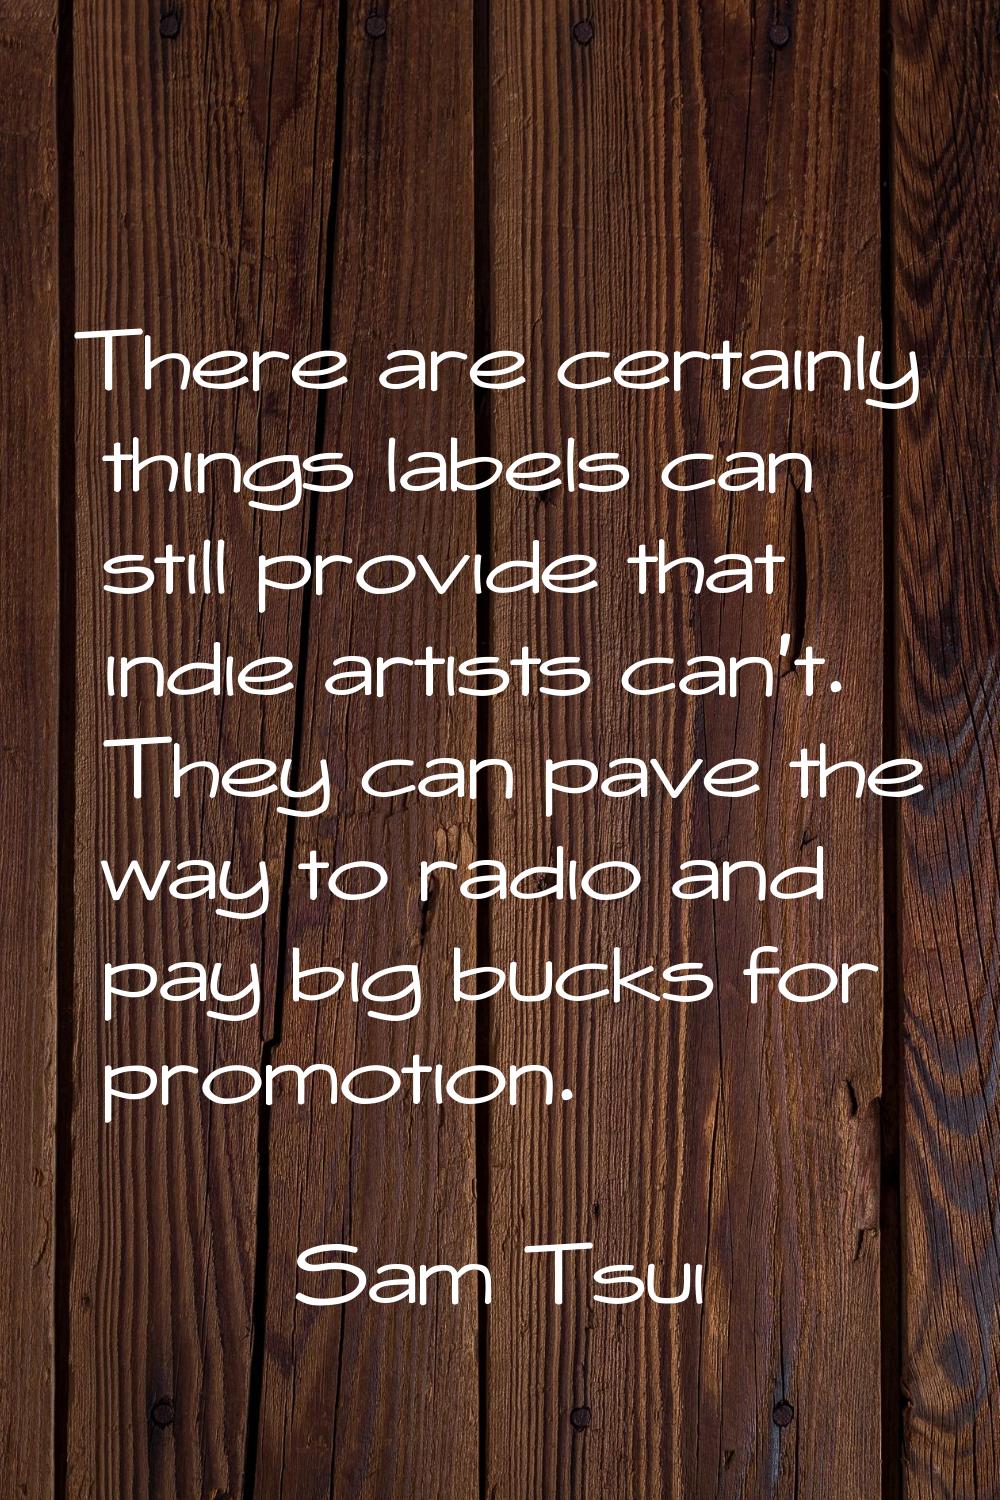 There are certainly things labels can still provide that indie artists can't. They can pave the way